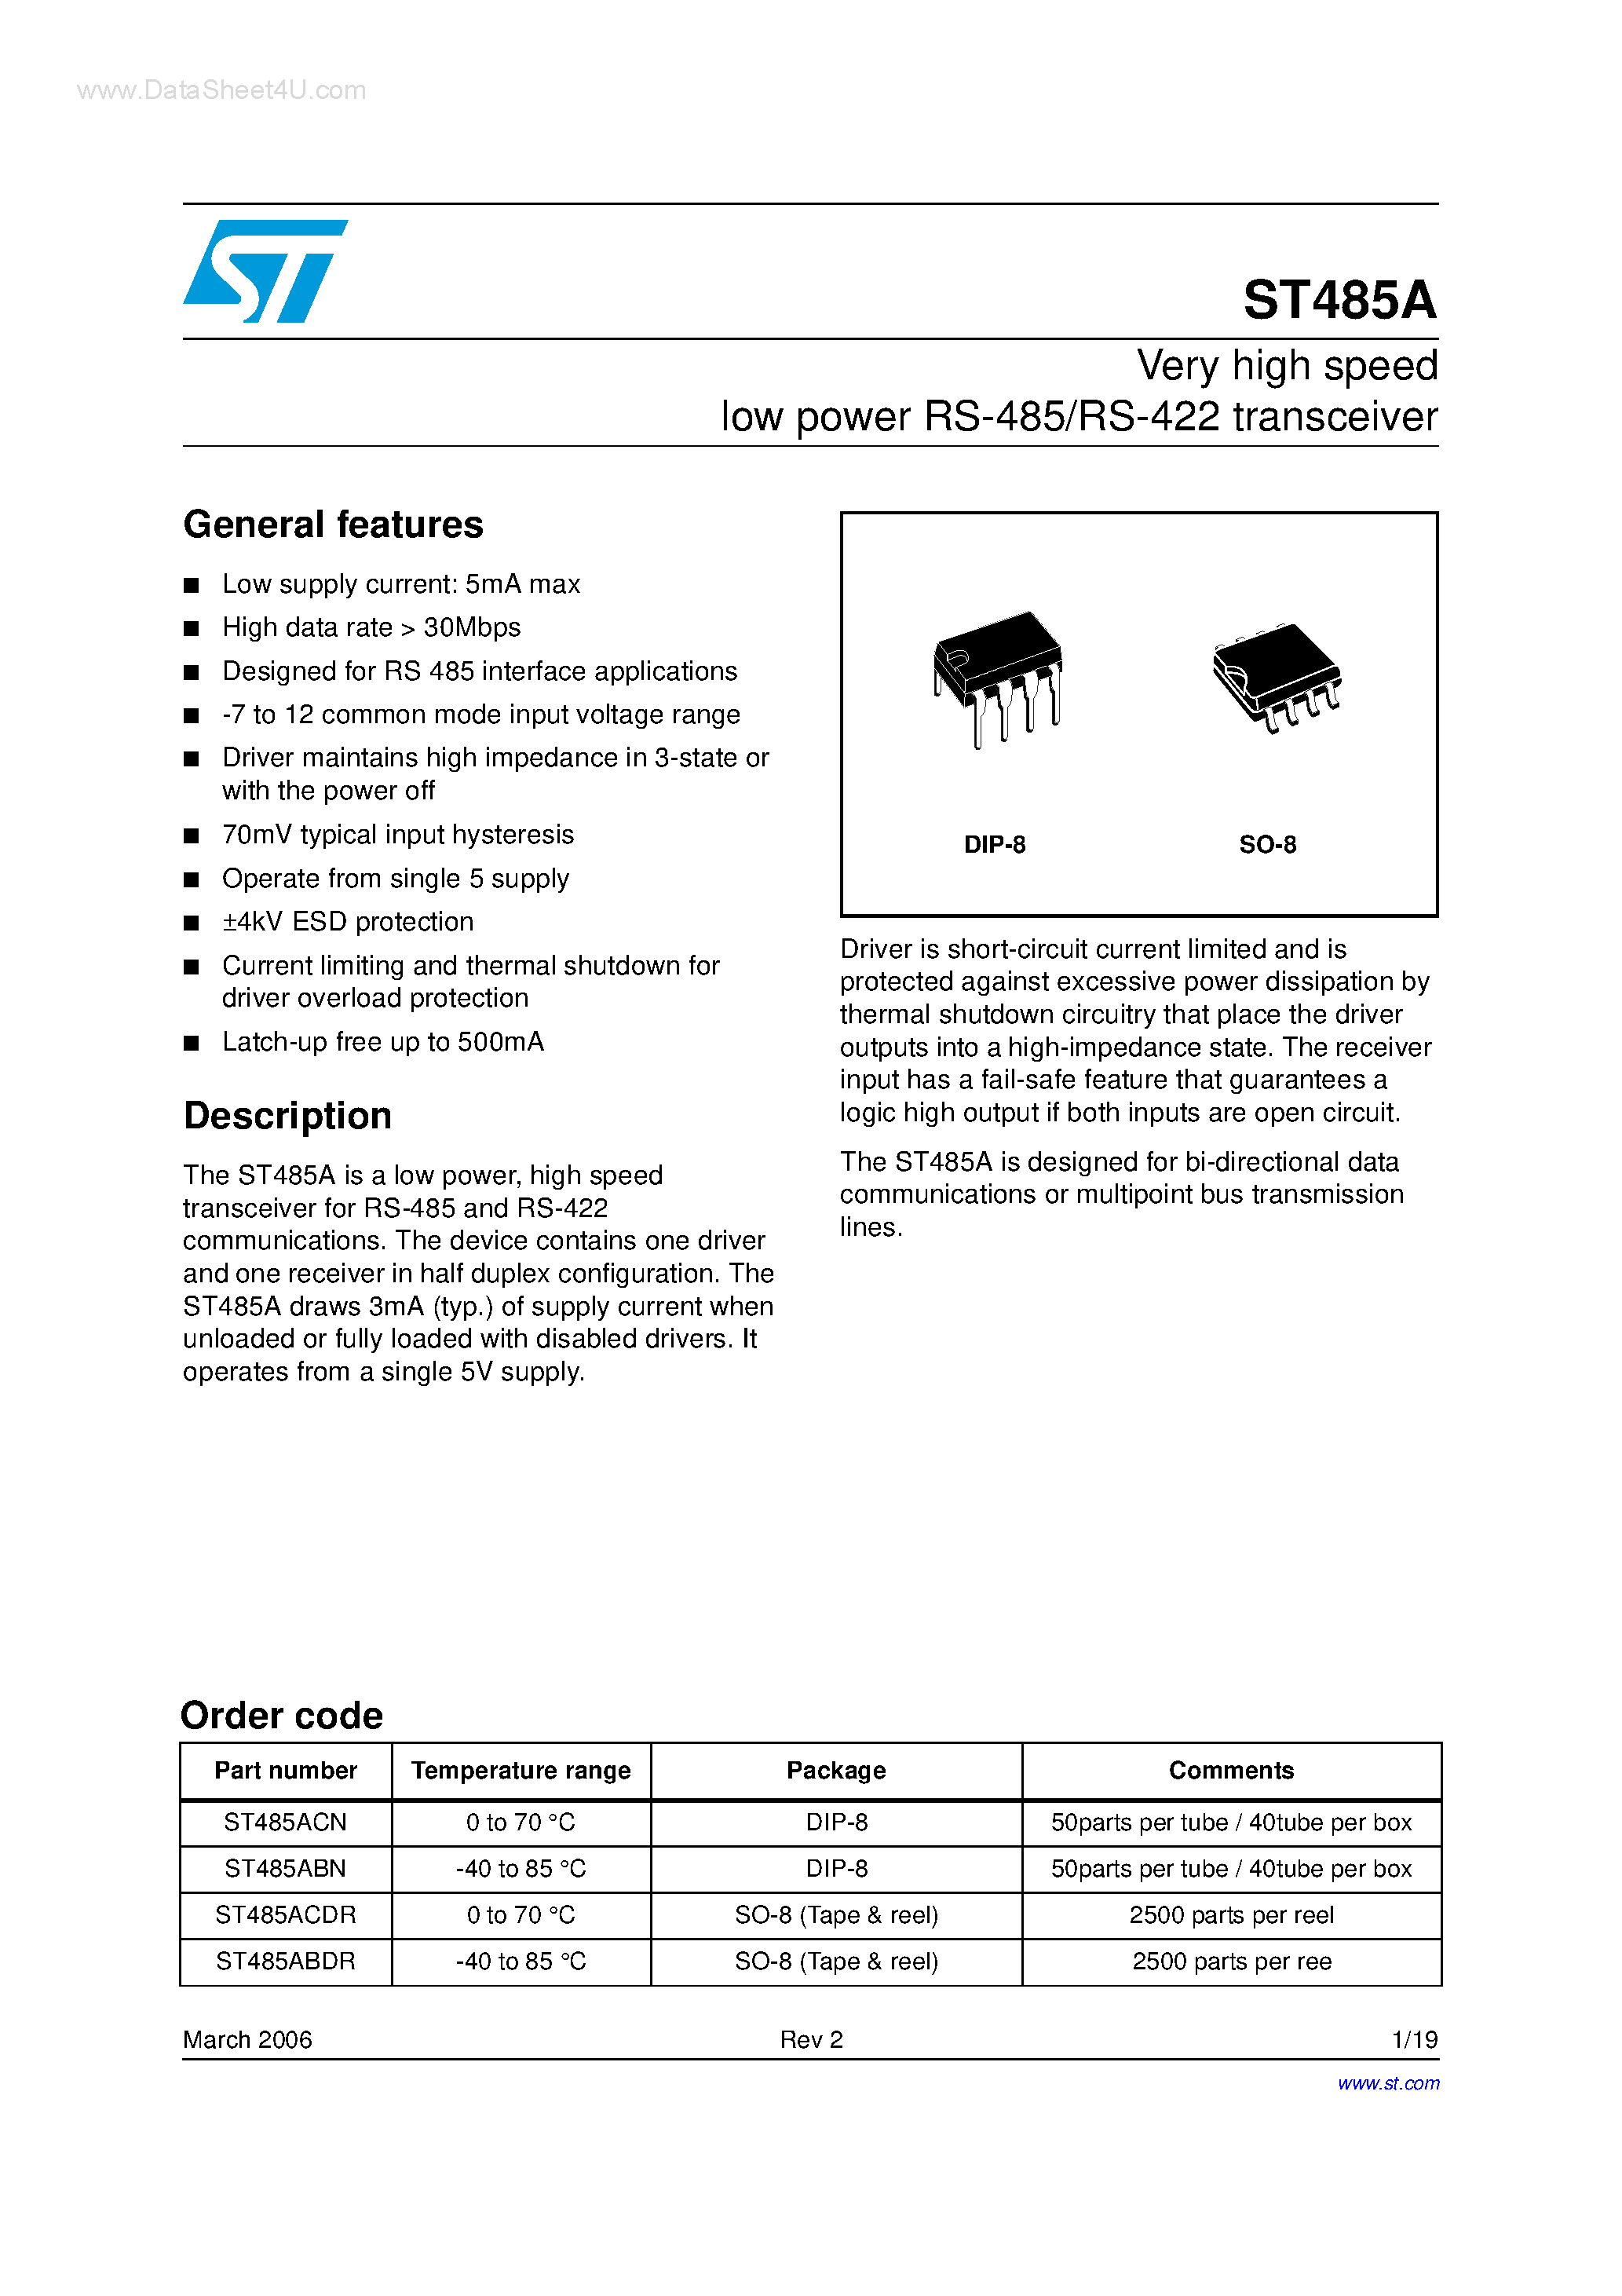 Datasheet ST485A - Very high speed low power RS-485/RS-422 transceiver page 1